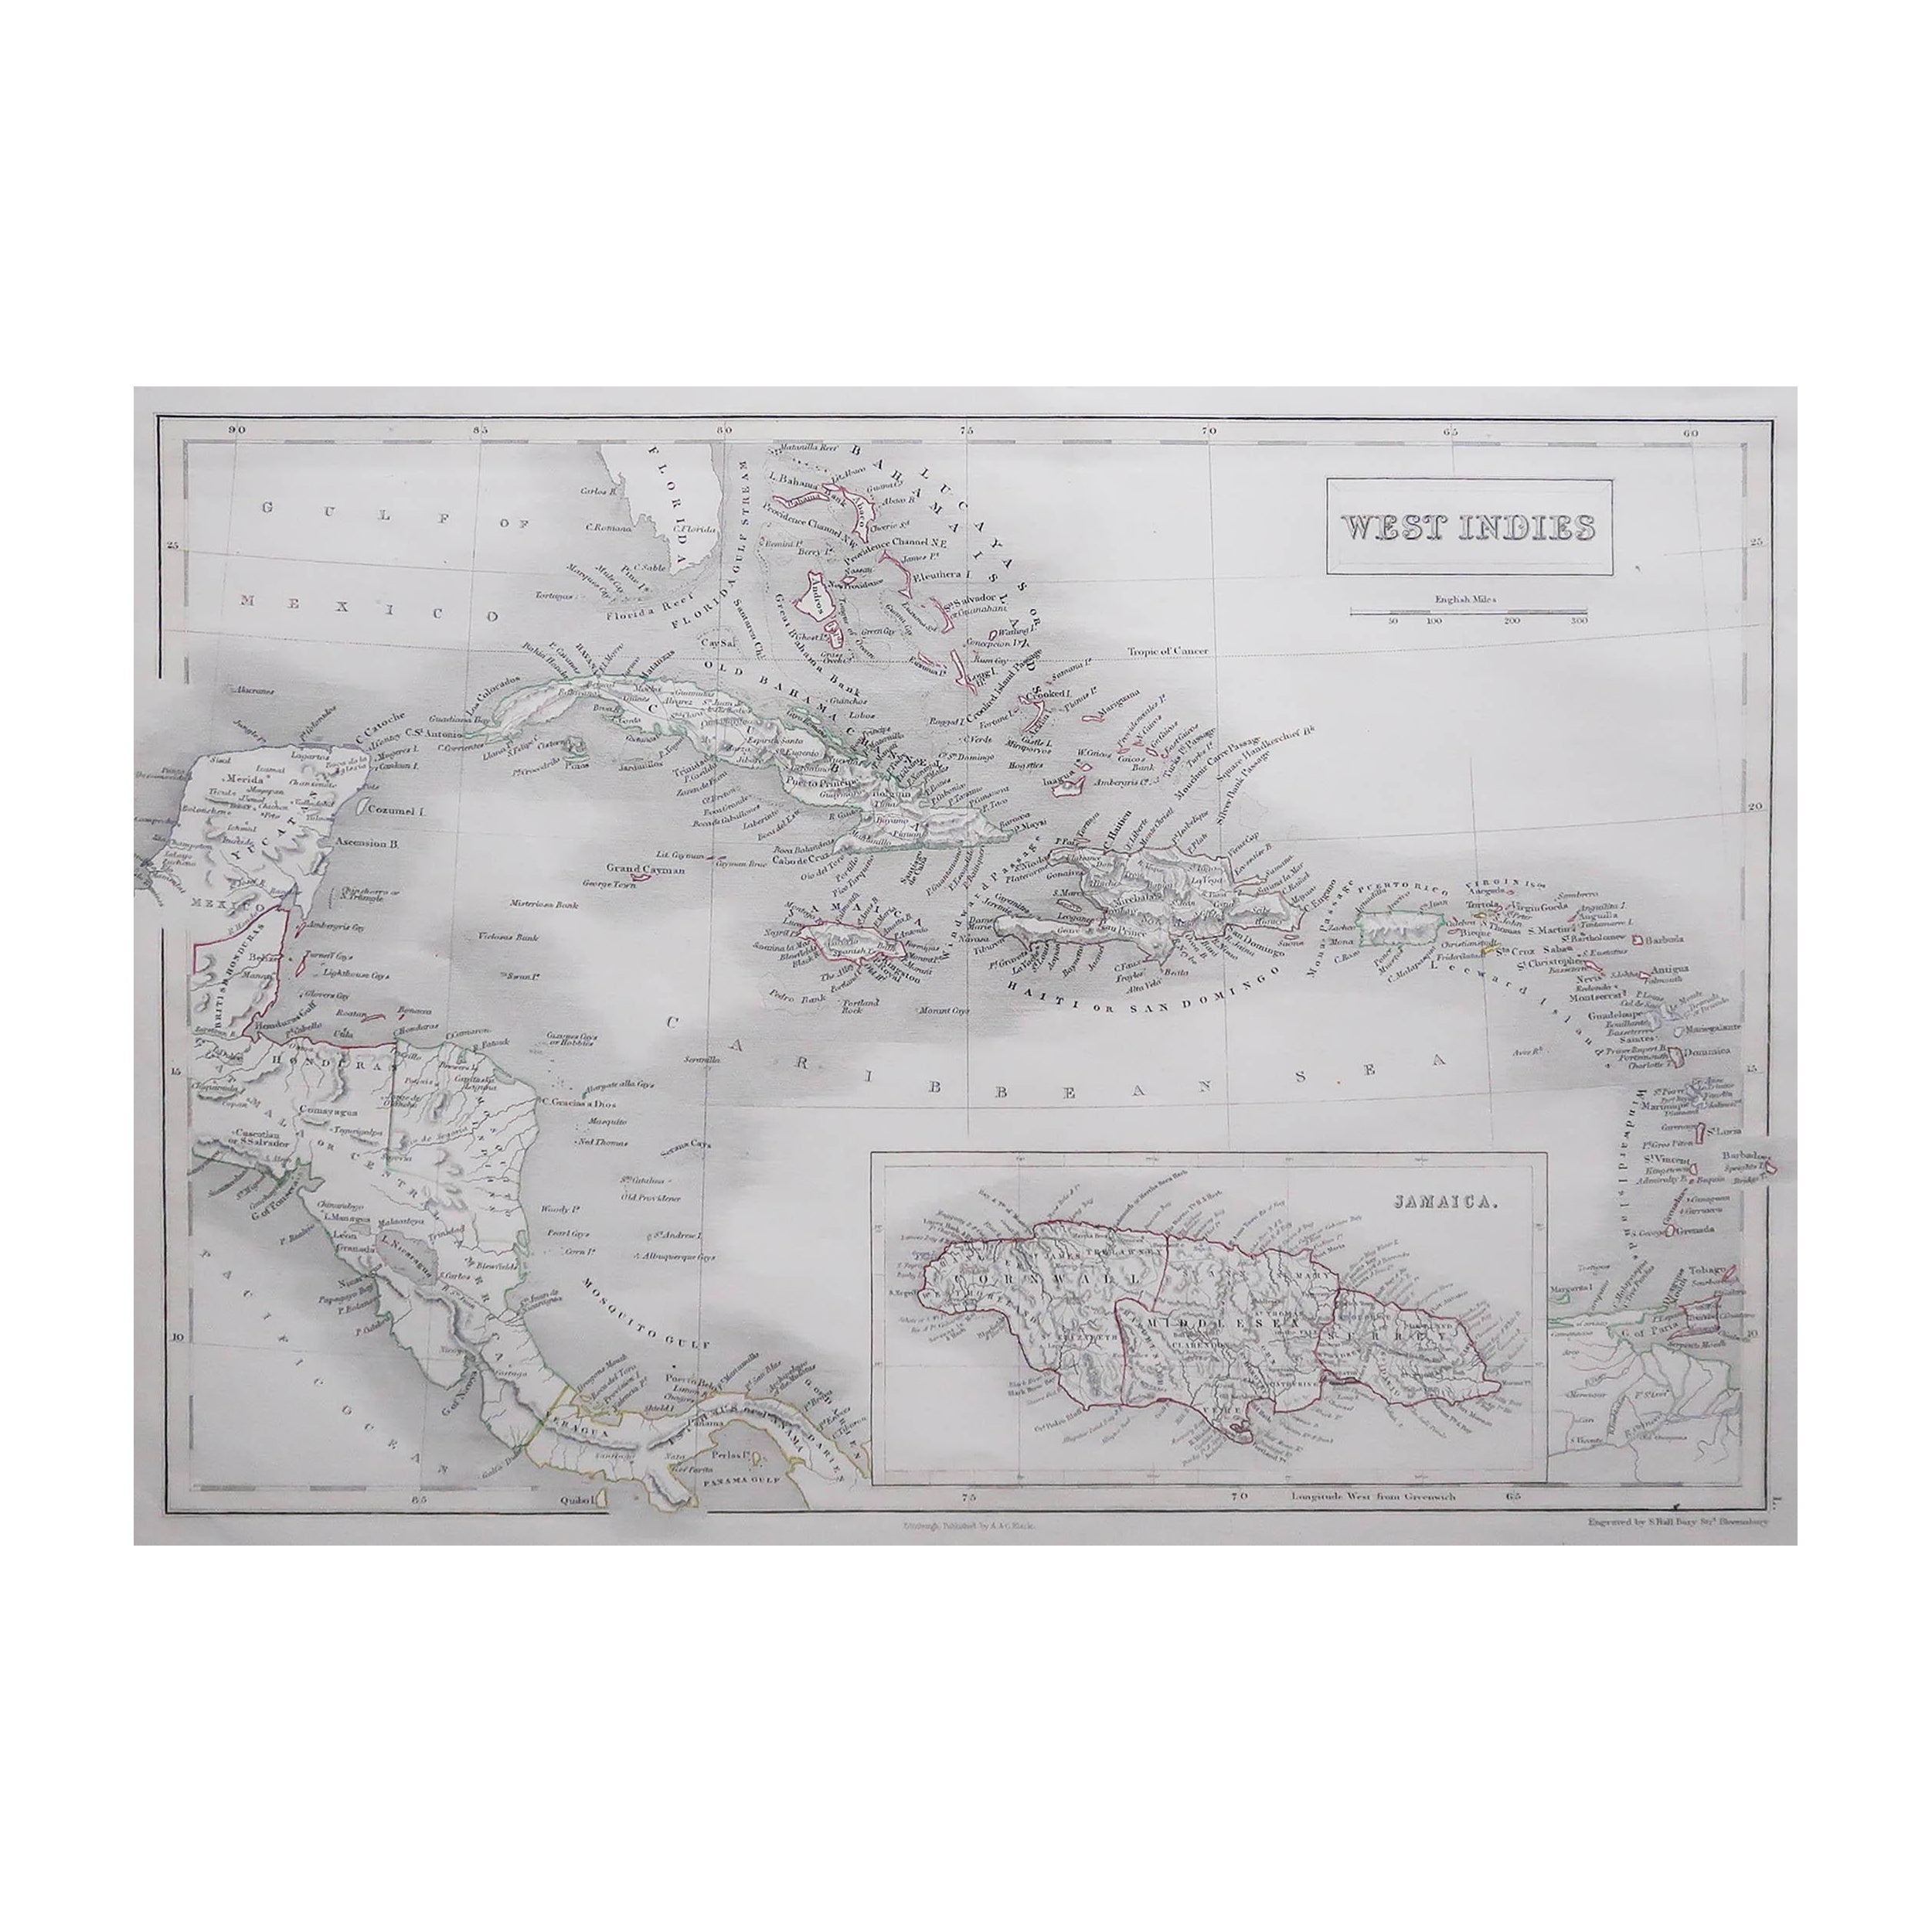 Large Original Antique Map of The West Indies by Sidney Hall, 1847